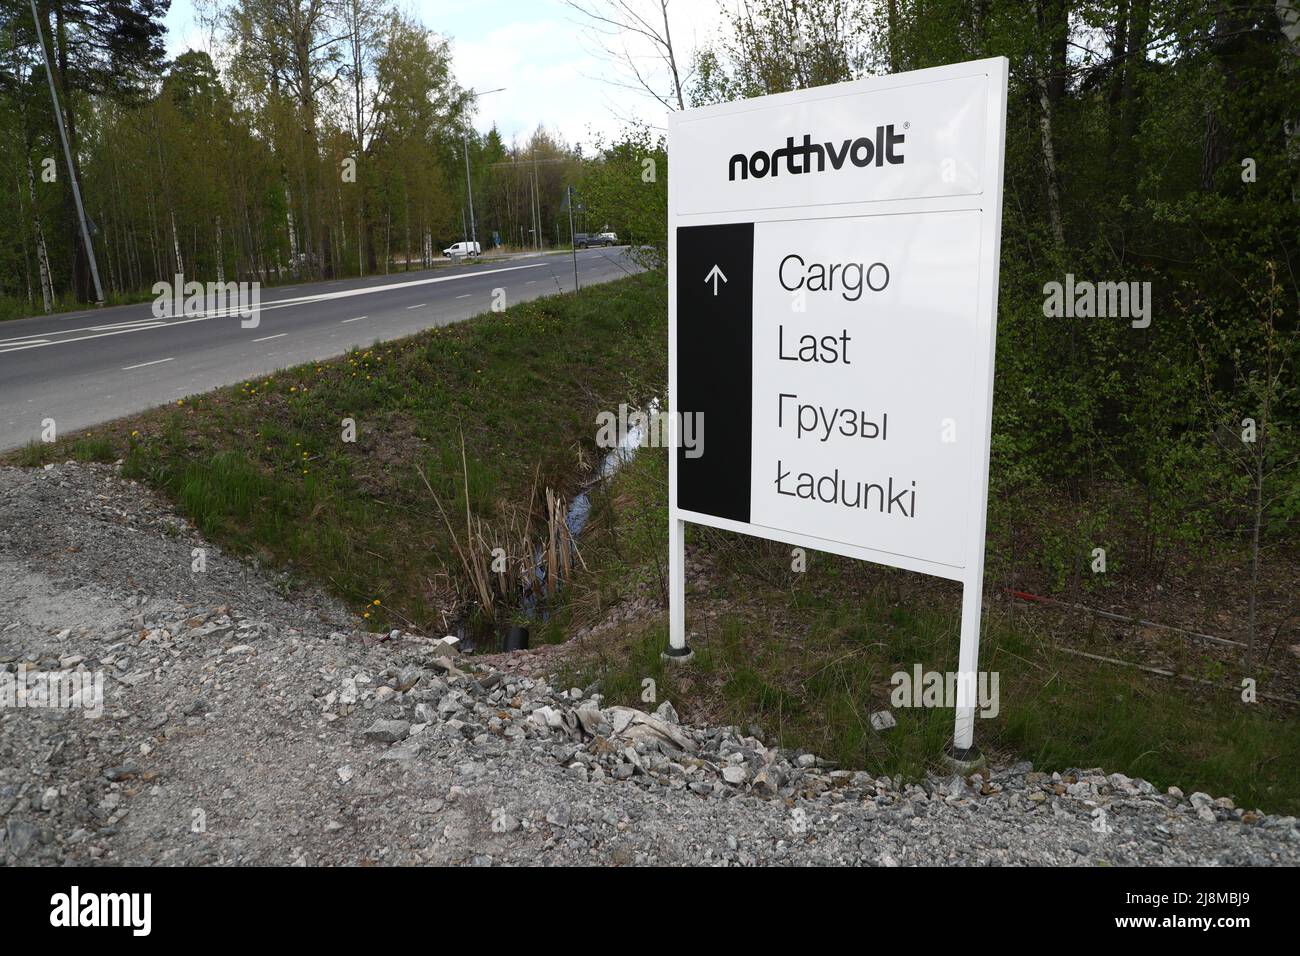 Northvolt company in Västerås, Sweden. Northvolt AB is a Swedish battery developer and manufacturer, specializing in lithium-ion technology for electric vehicles. Stock Photo